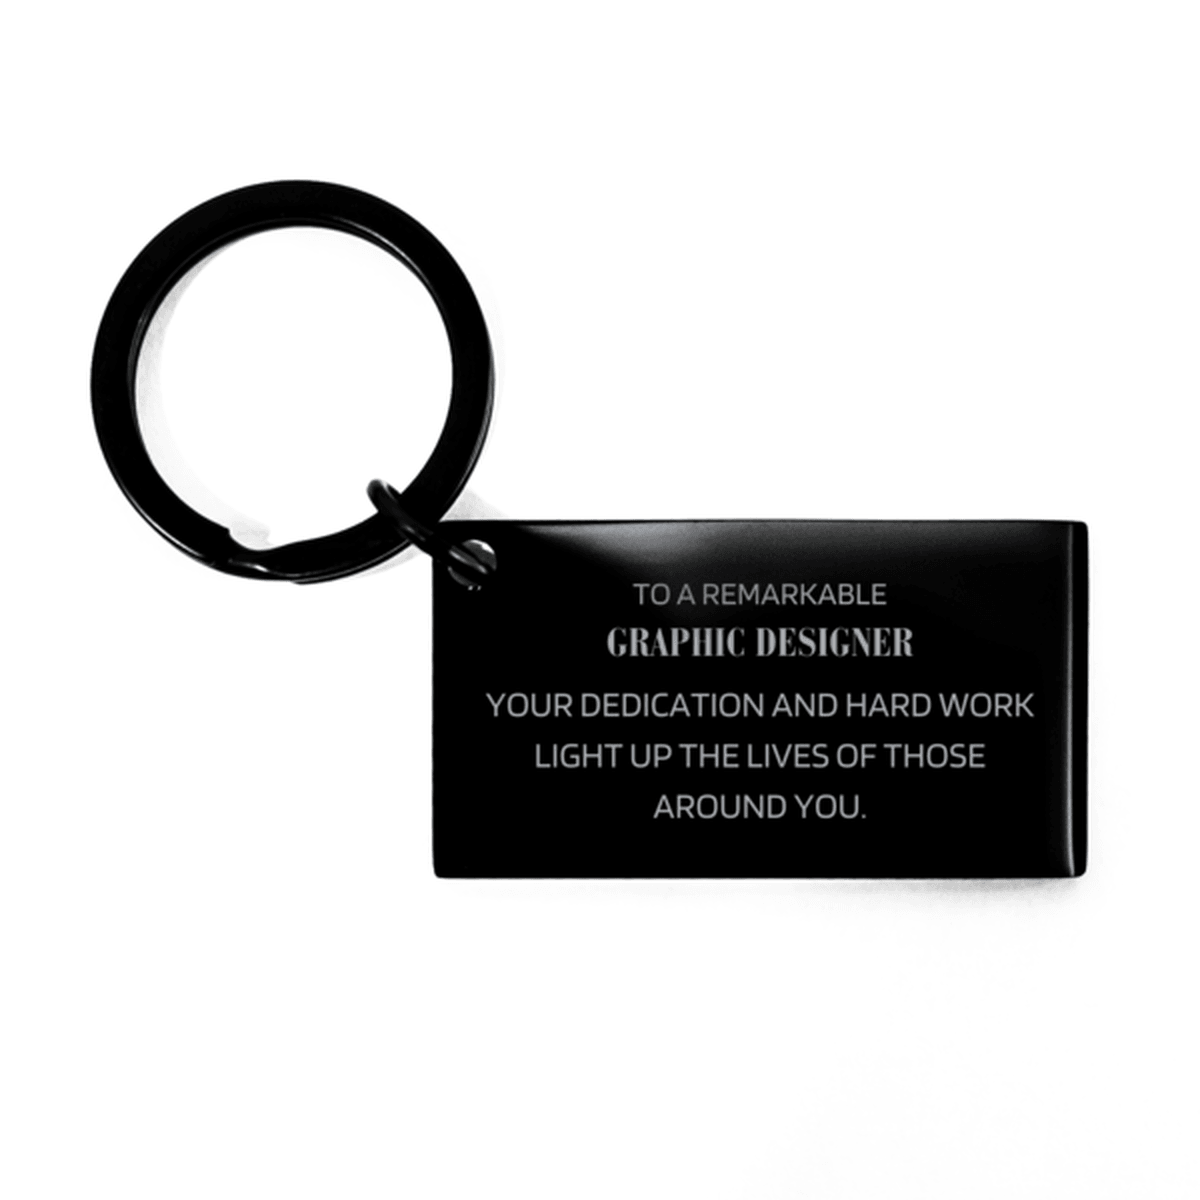 Remarkable Graphic Designer Gifts, Your dedication and hard work, Inspirational Birthday Christmas Unique Keychain For Graphic Designer, Coworkers, Men, Women, Friends - Mallard Moon Gift Shop